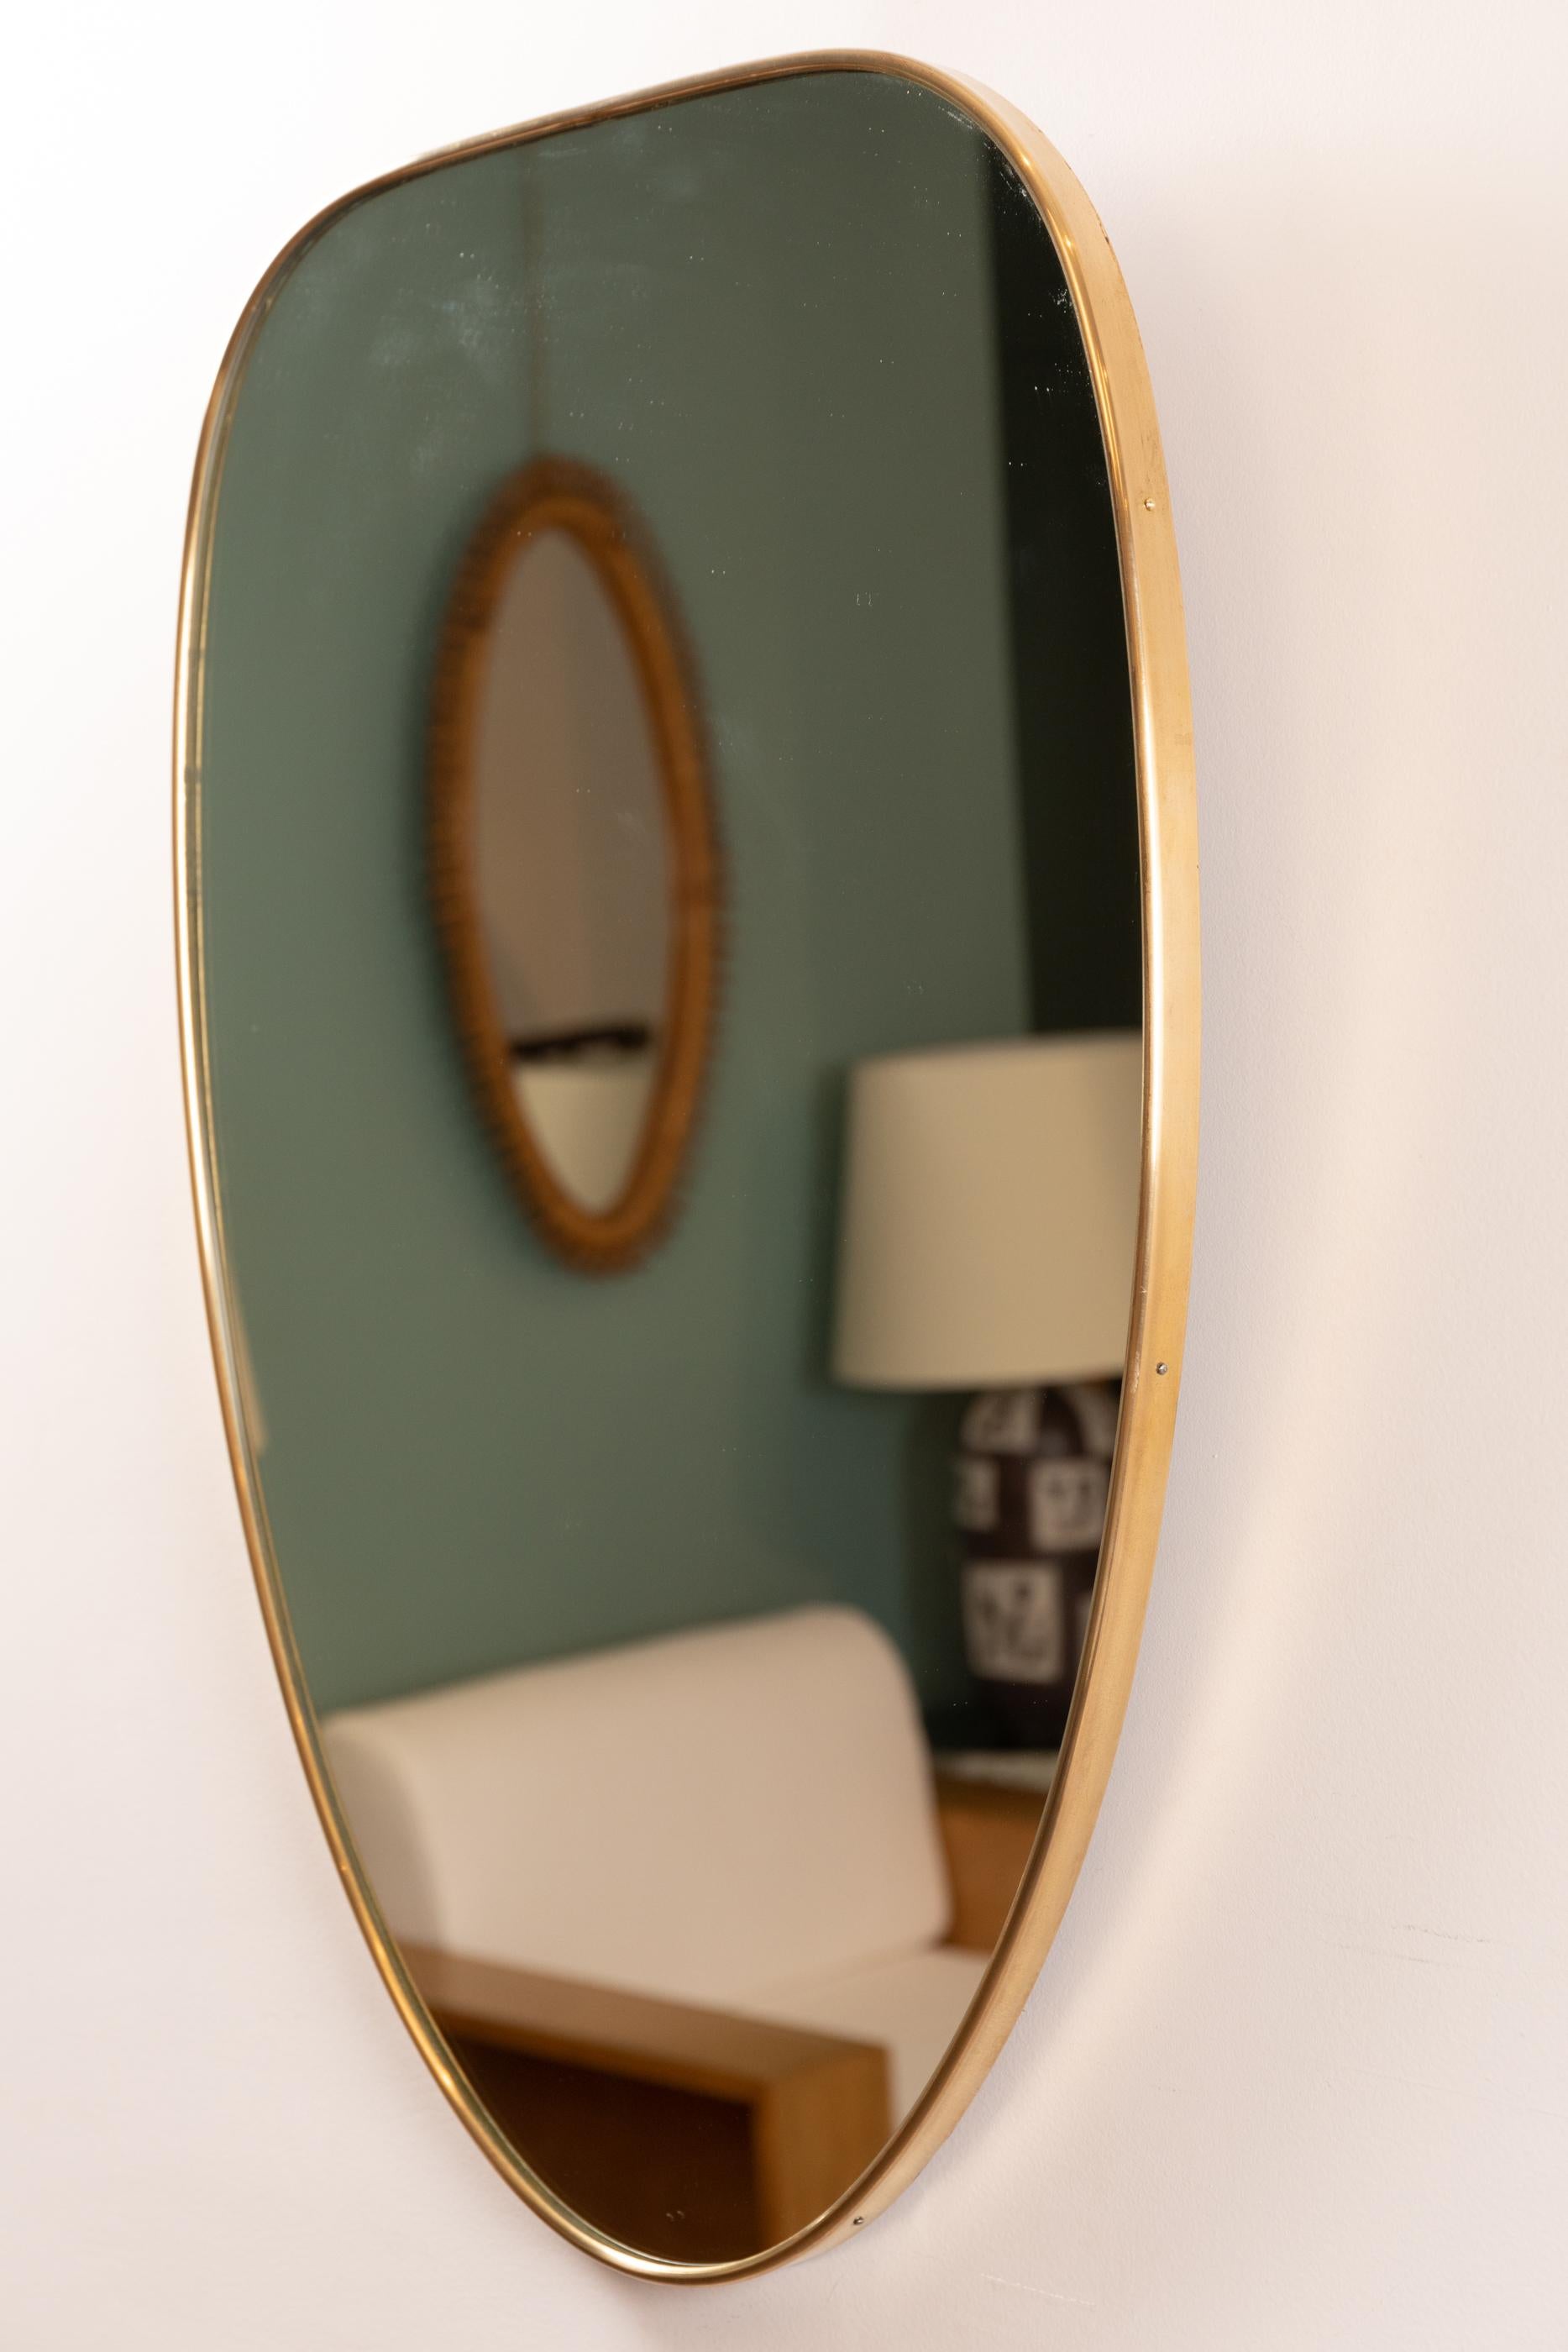 Wall mirror, brass framed,
 in the style of Gio Ponti, 
 Italy, circa 1955. 

Measures: 
H: 72.5 cm (28.5 in.)
W: 49 cm (19.3 in.)
D: 2.5 cm (0.9 in.).